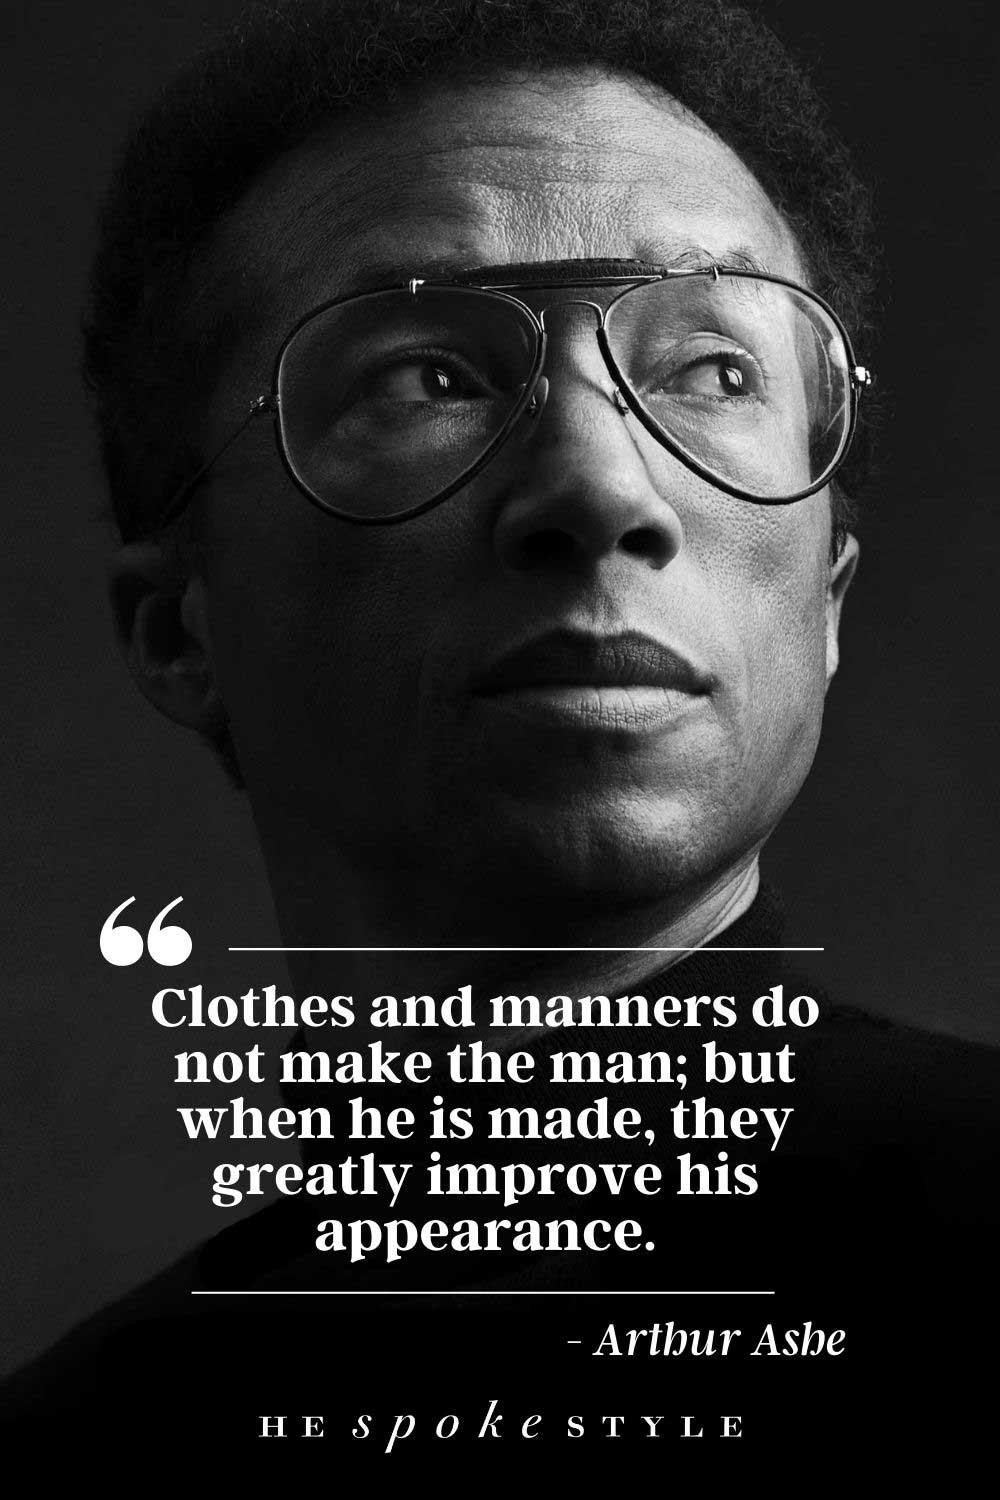 Arthur Ashe fashion quote about clothes and manners